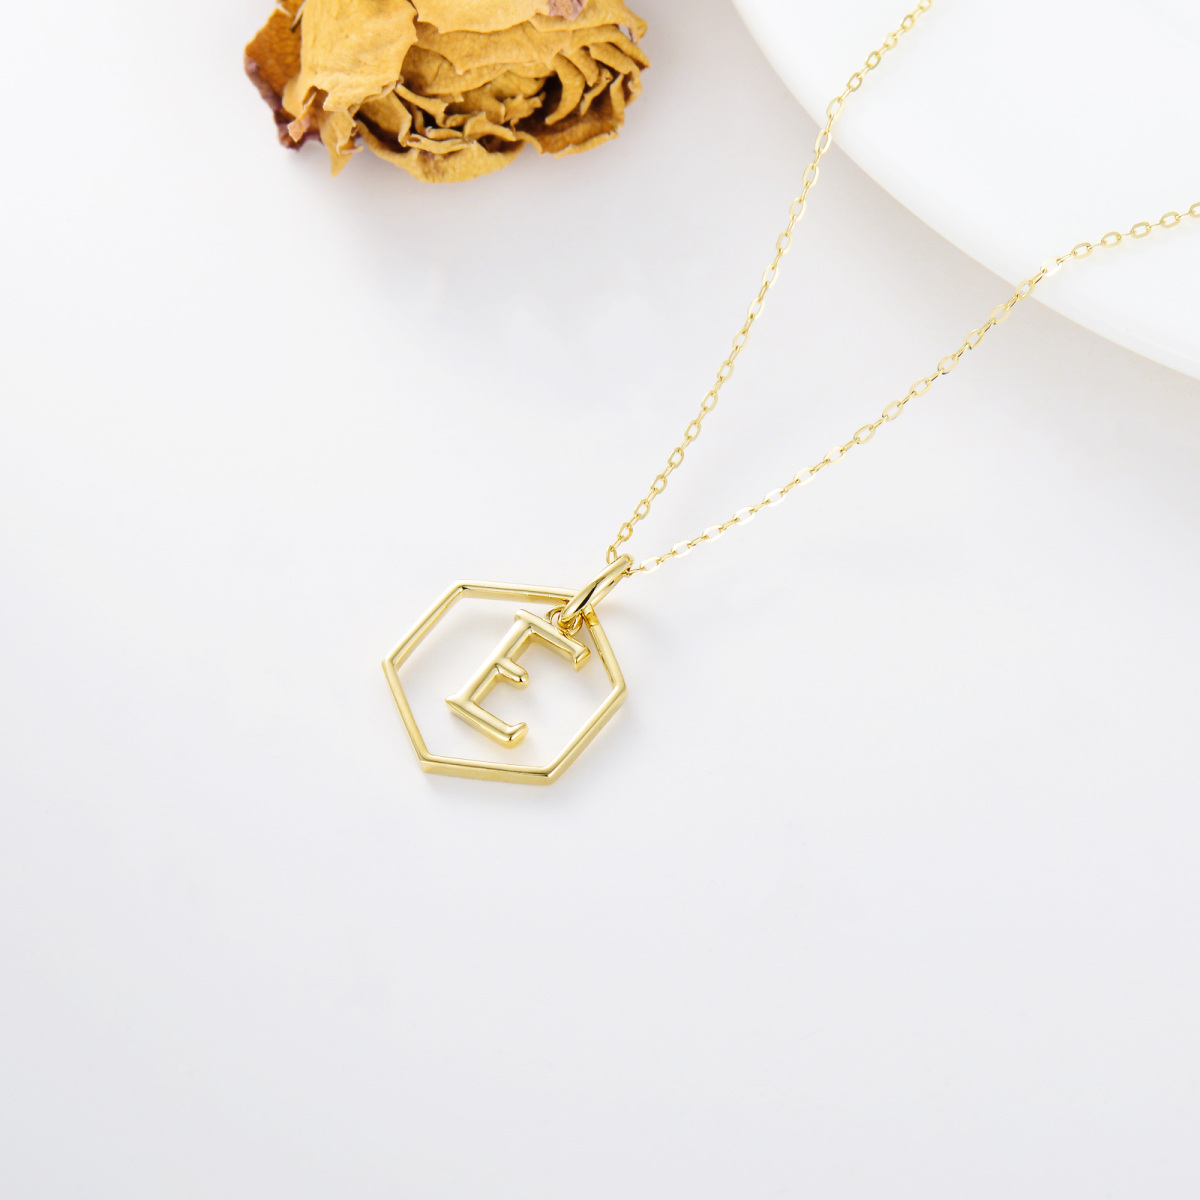 9K Gold Round Pendant Necklace with Initial Letter E-4